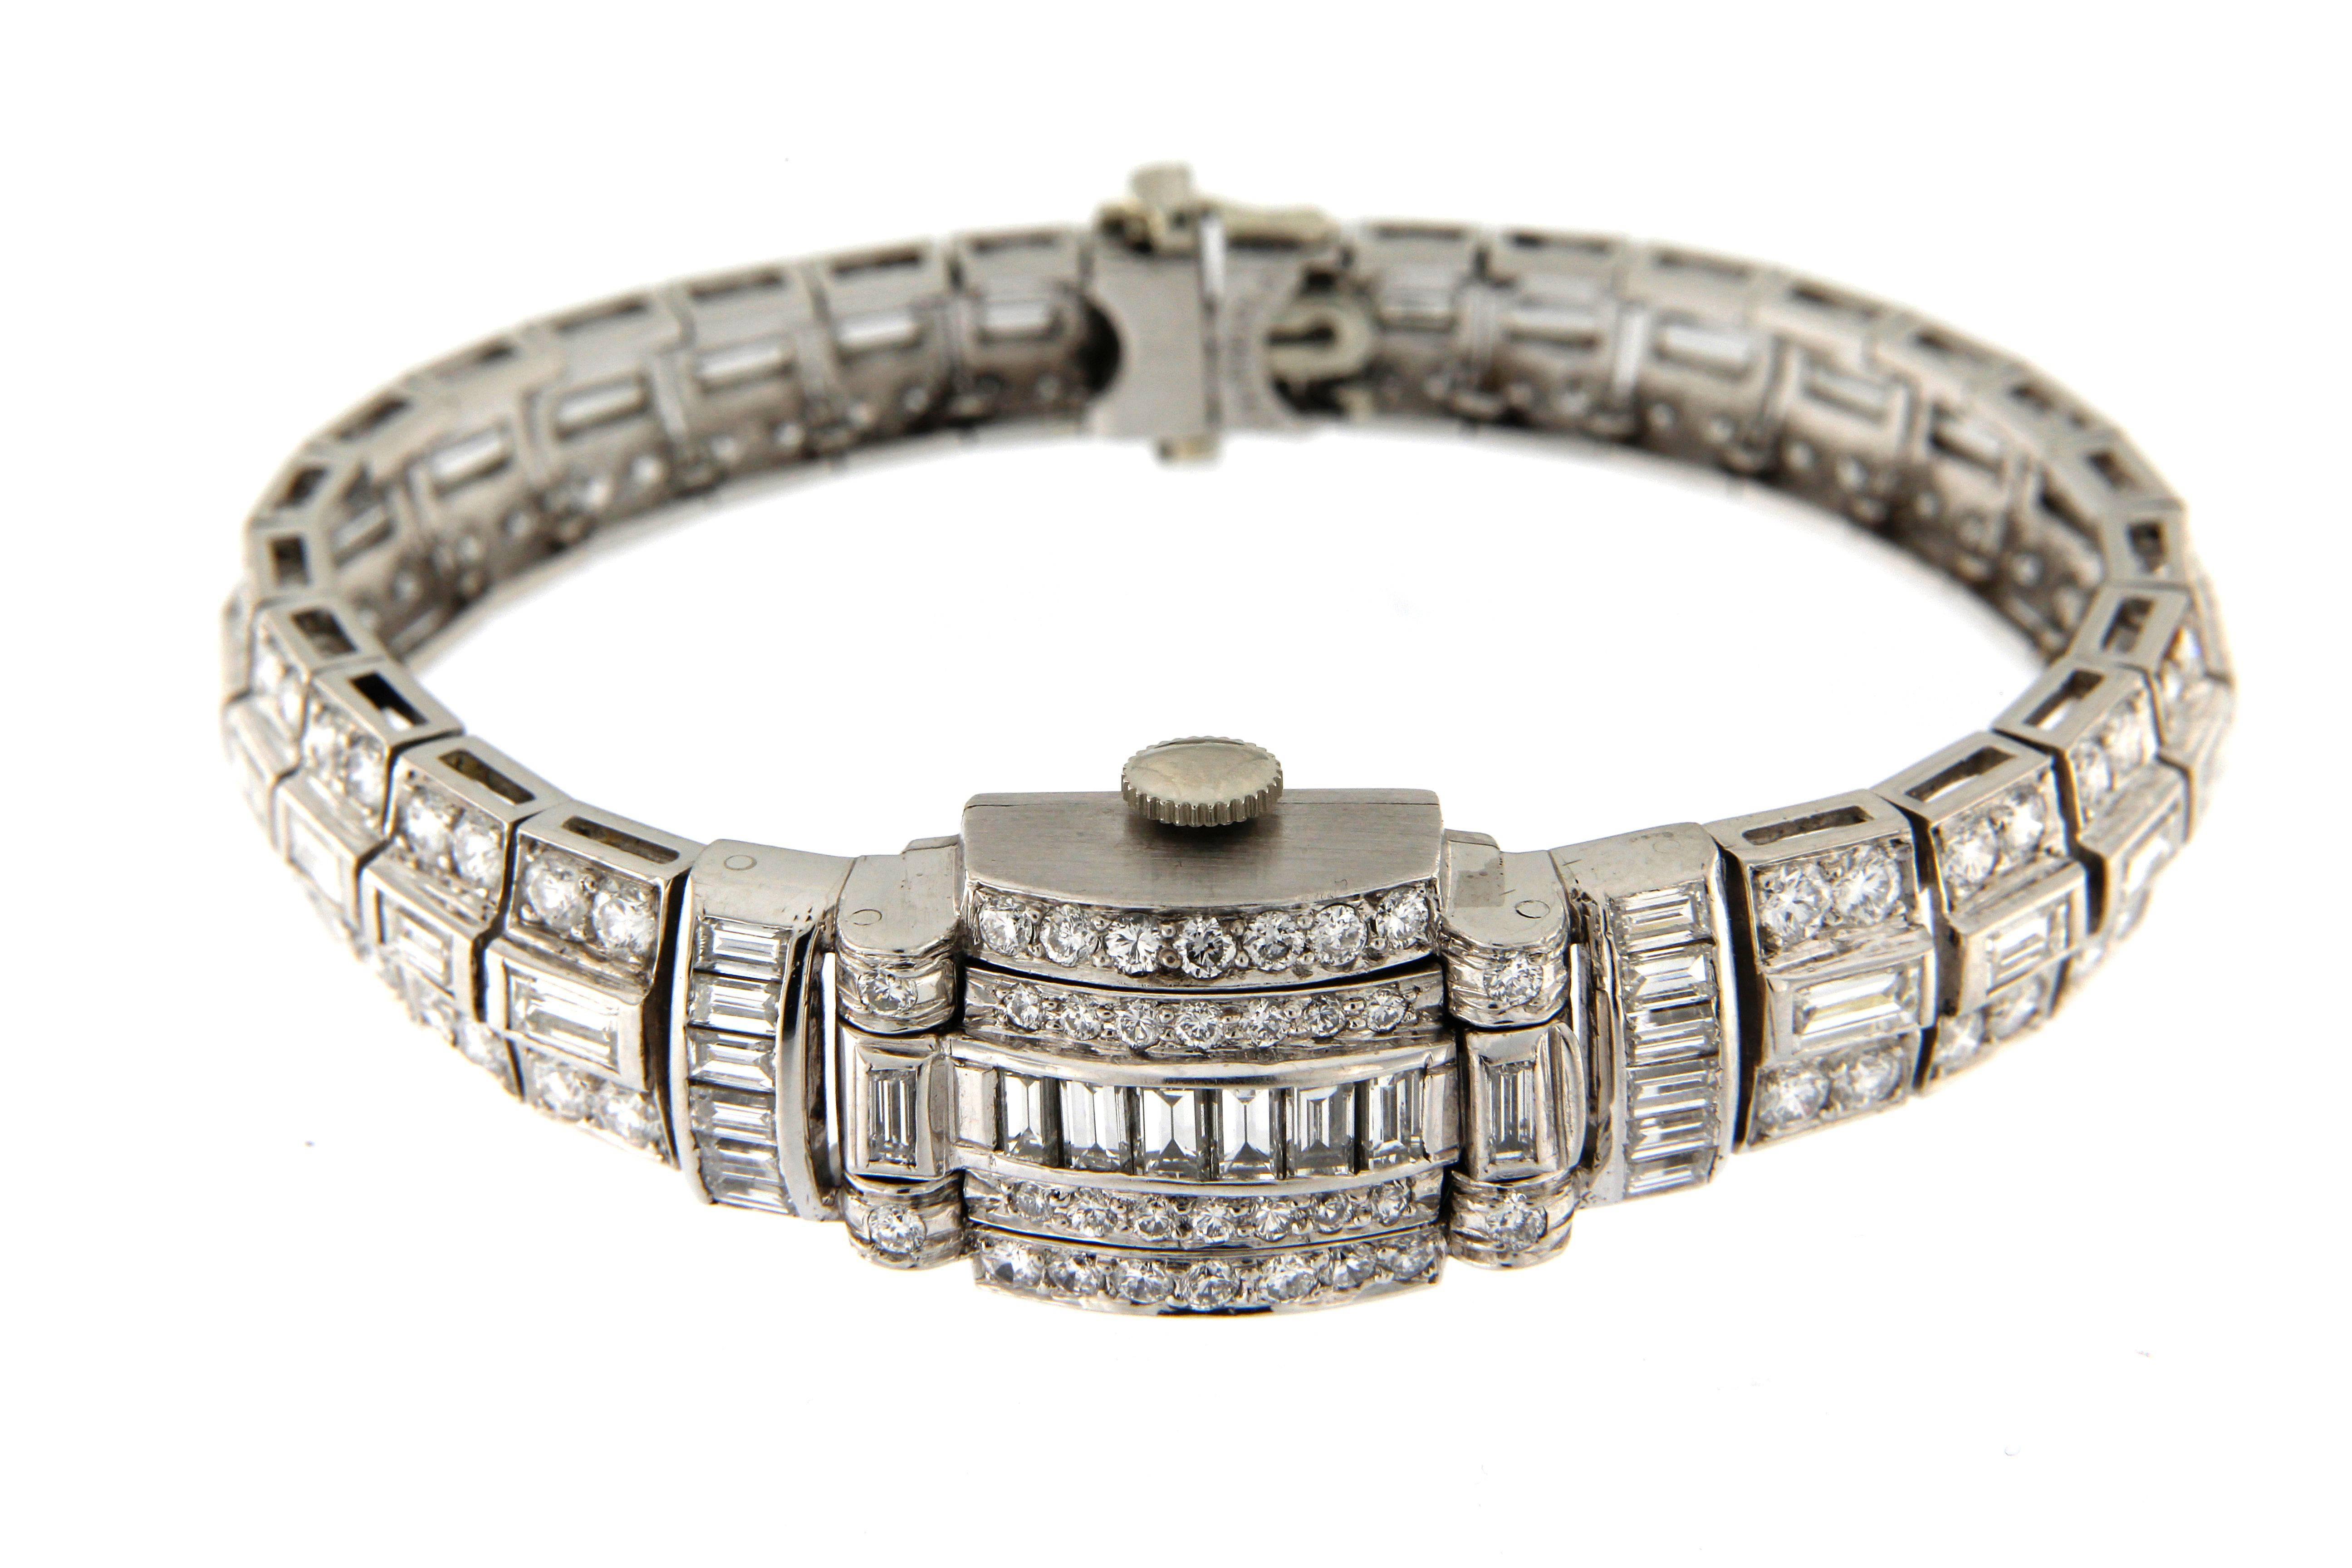 Branded Hamilton, made in Swiss, 1960 circa. This kind of jewel was generally produced in Italy and then set with the watch in Swiss. Very rich diamond bracelet set with baguette circa ct. 4,00 and full round cut diamonds circa ct. 4.00, a spring